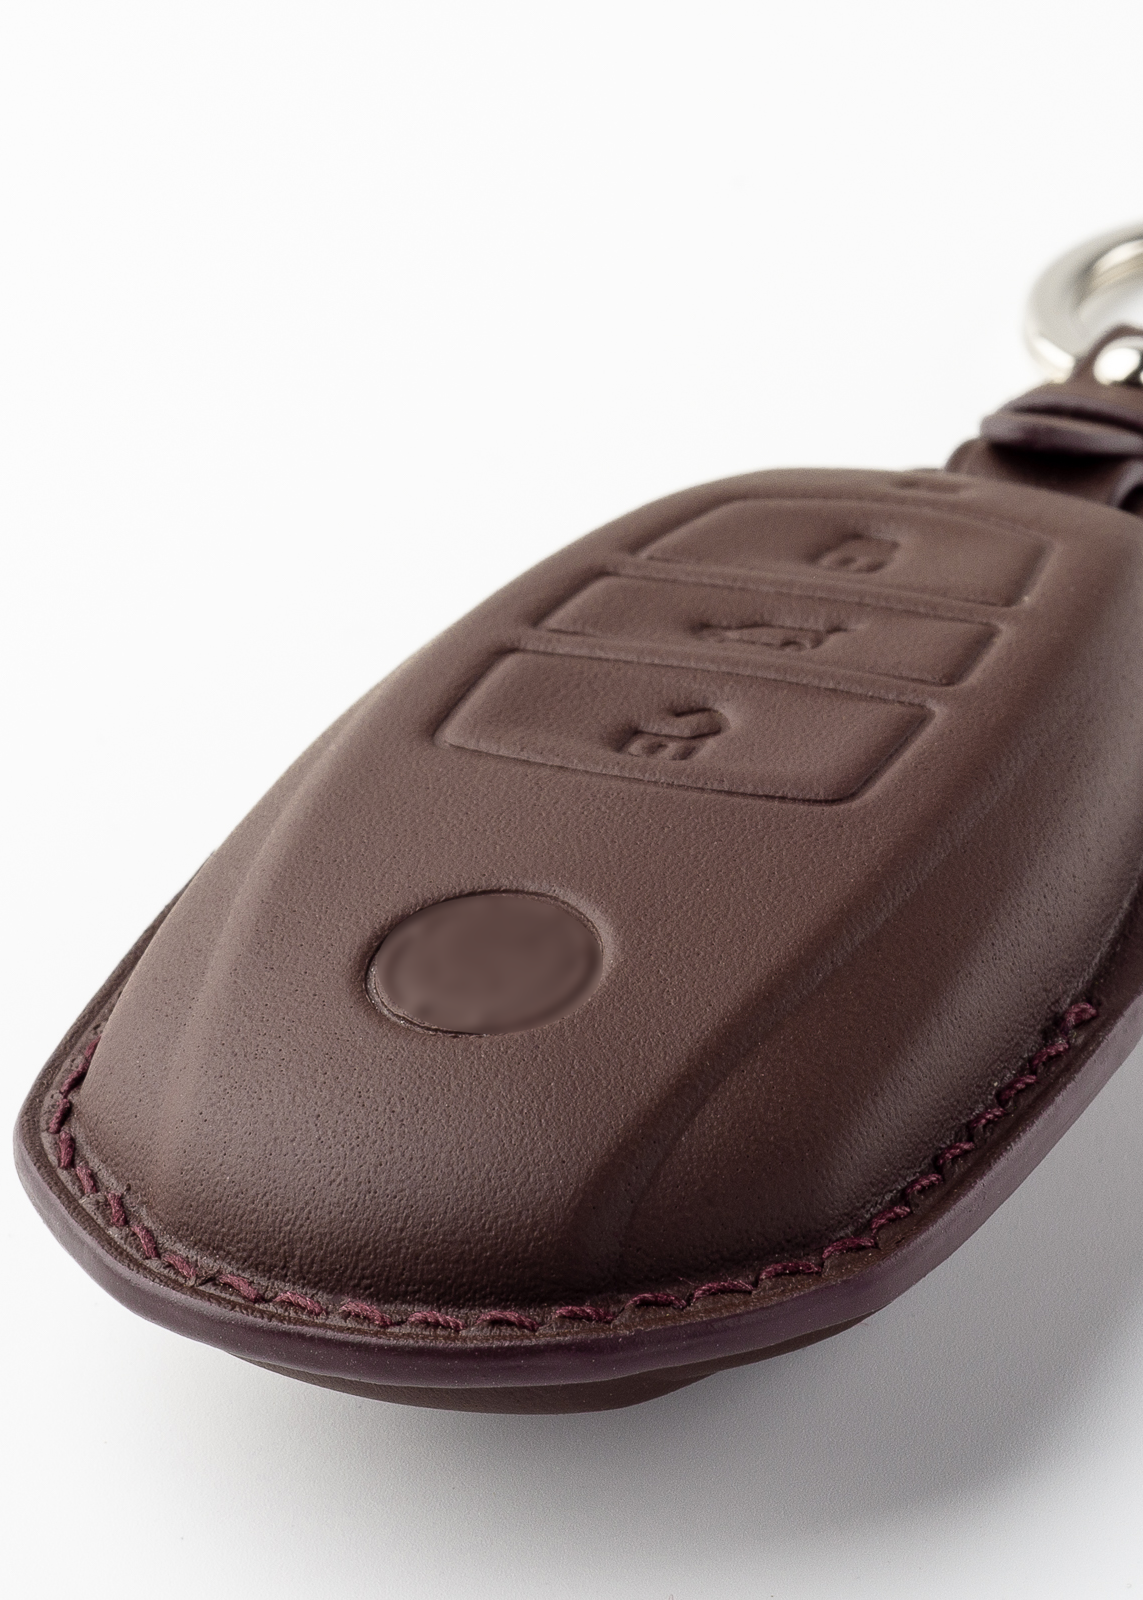 Timotheus for Volkswagen key fob cover case, Compatible with Volkswagen key case, Handmade Genuine Leather for Volkswagen keychains | VG55